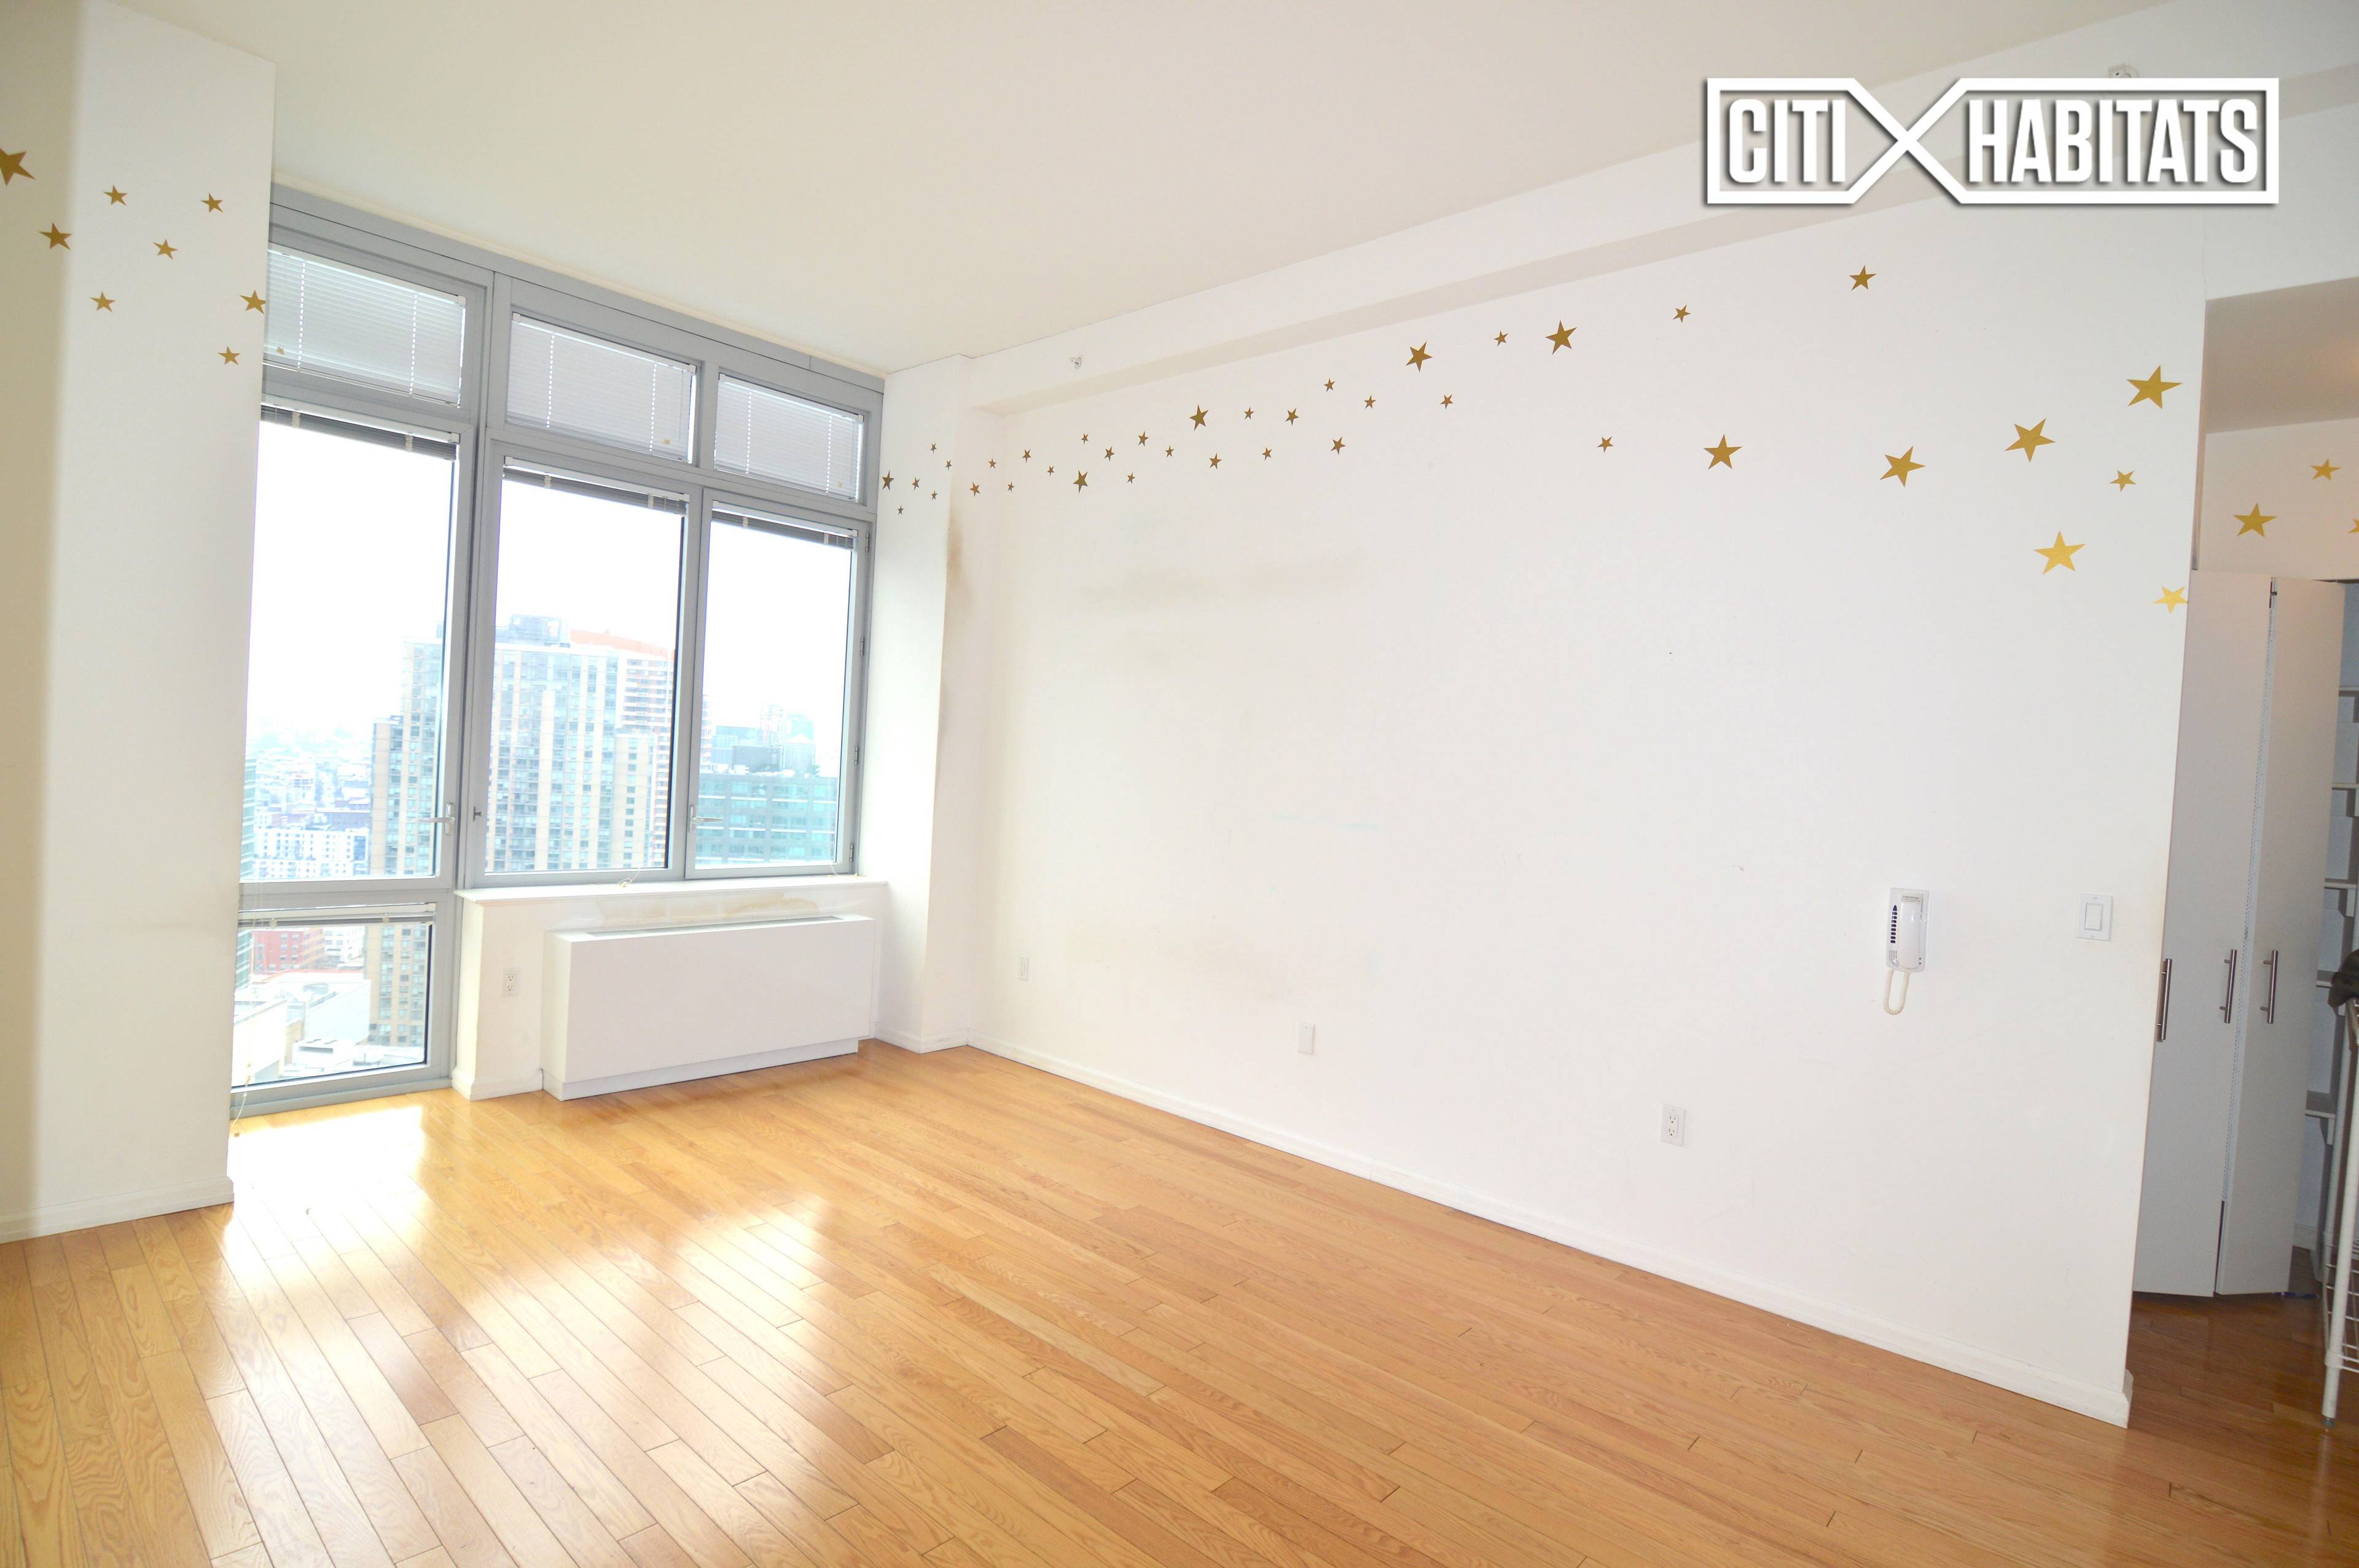 This sun drenched studio located on the PH level features floor to ceiling windows which face the river offering breathtaking views of the Manhattan skyline and the East River.